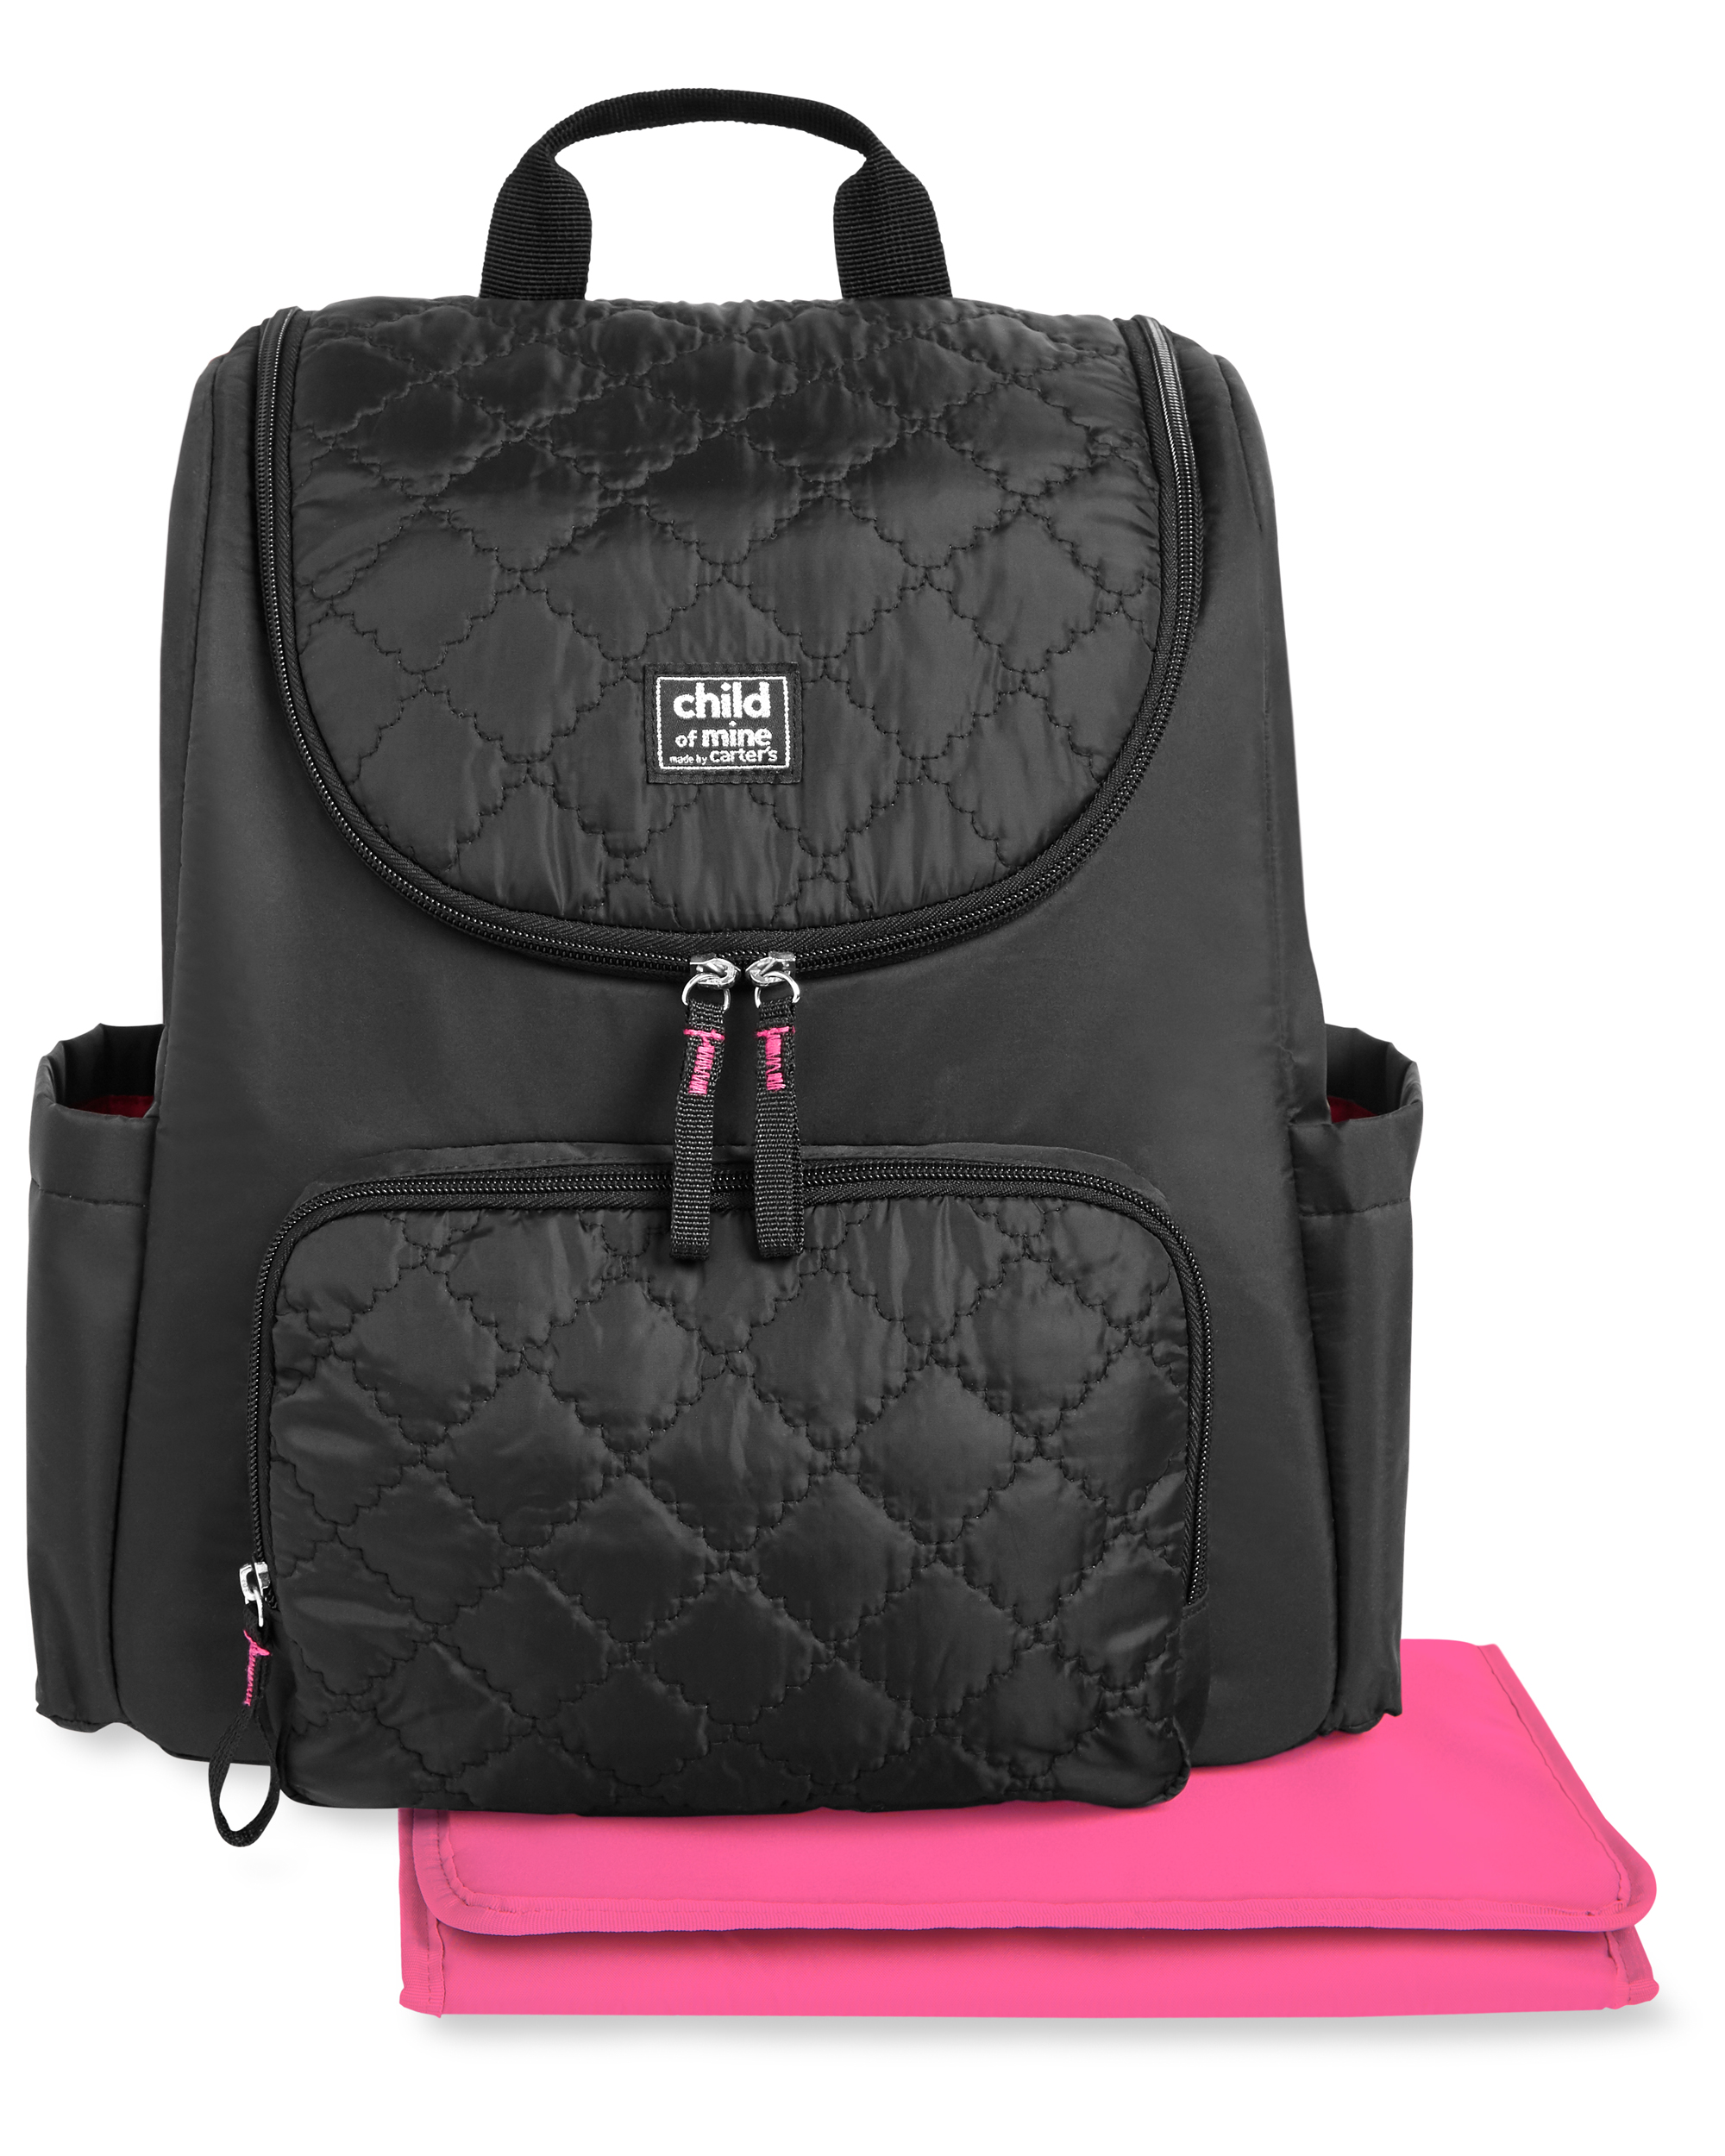 Child of Mine by Carter's Changing Pad Included Backpack Diaper Bag, Black Quilted - image 2 of 12